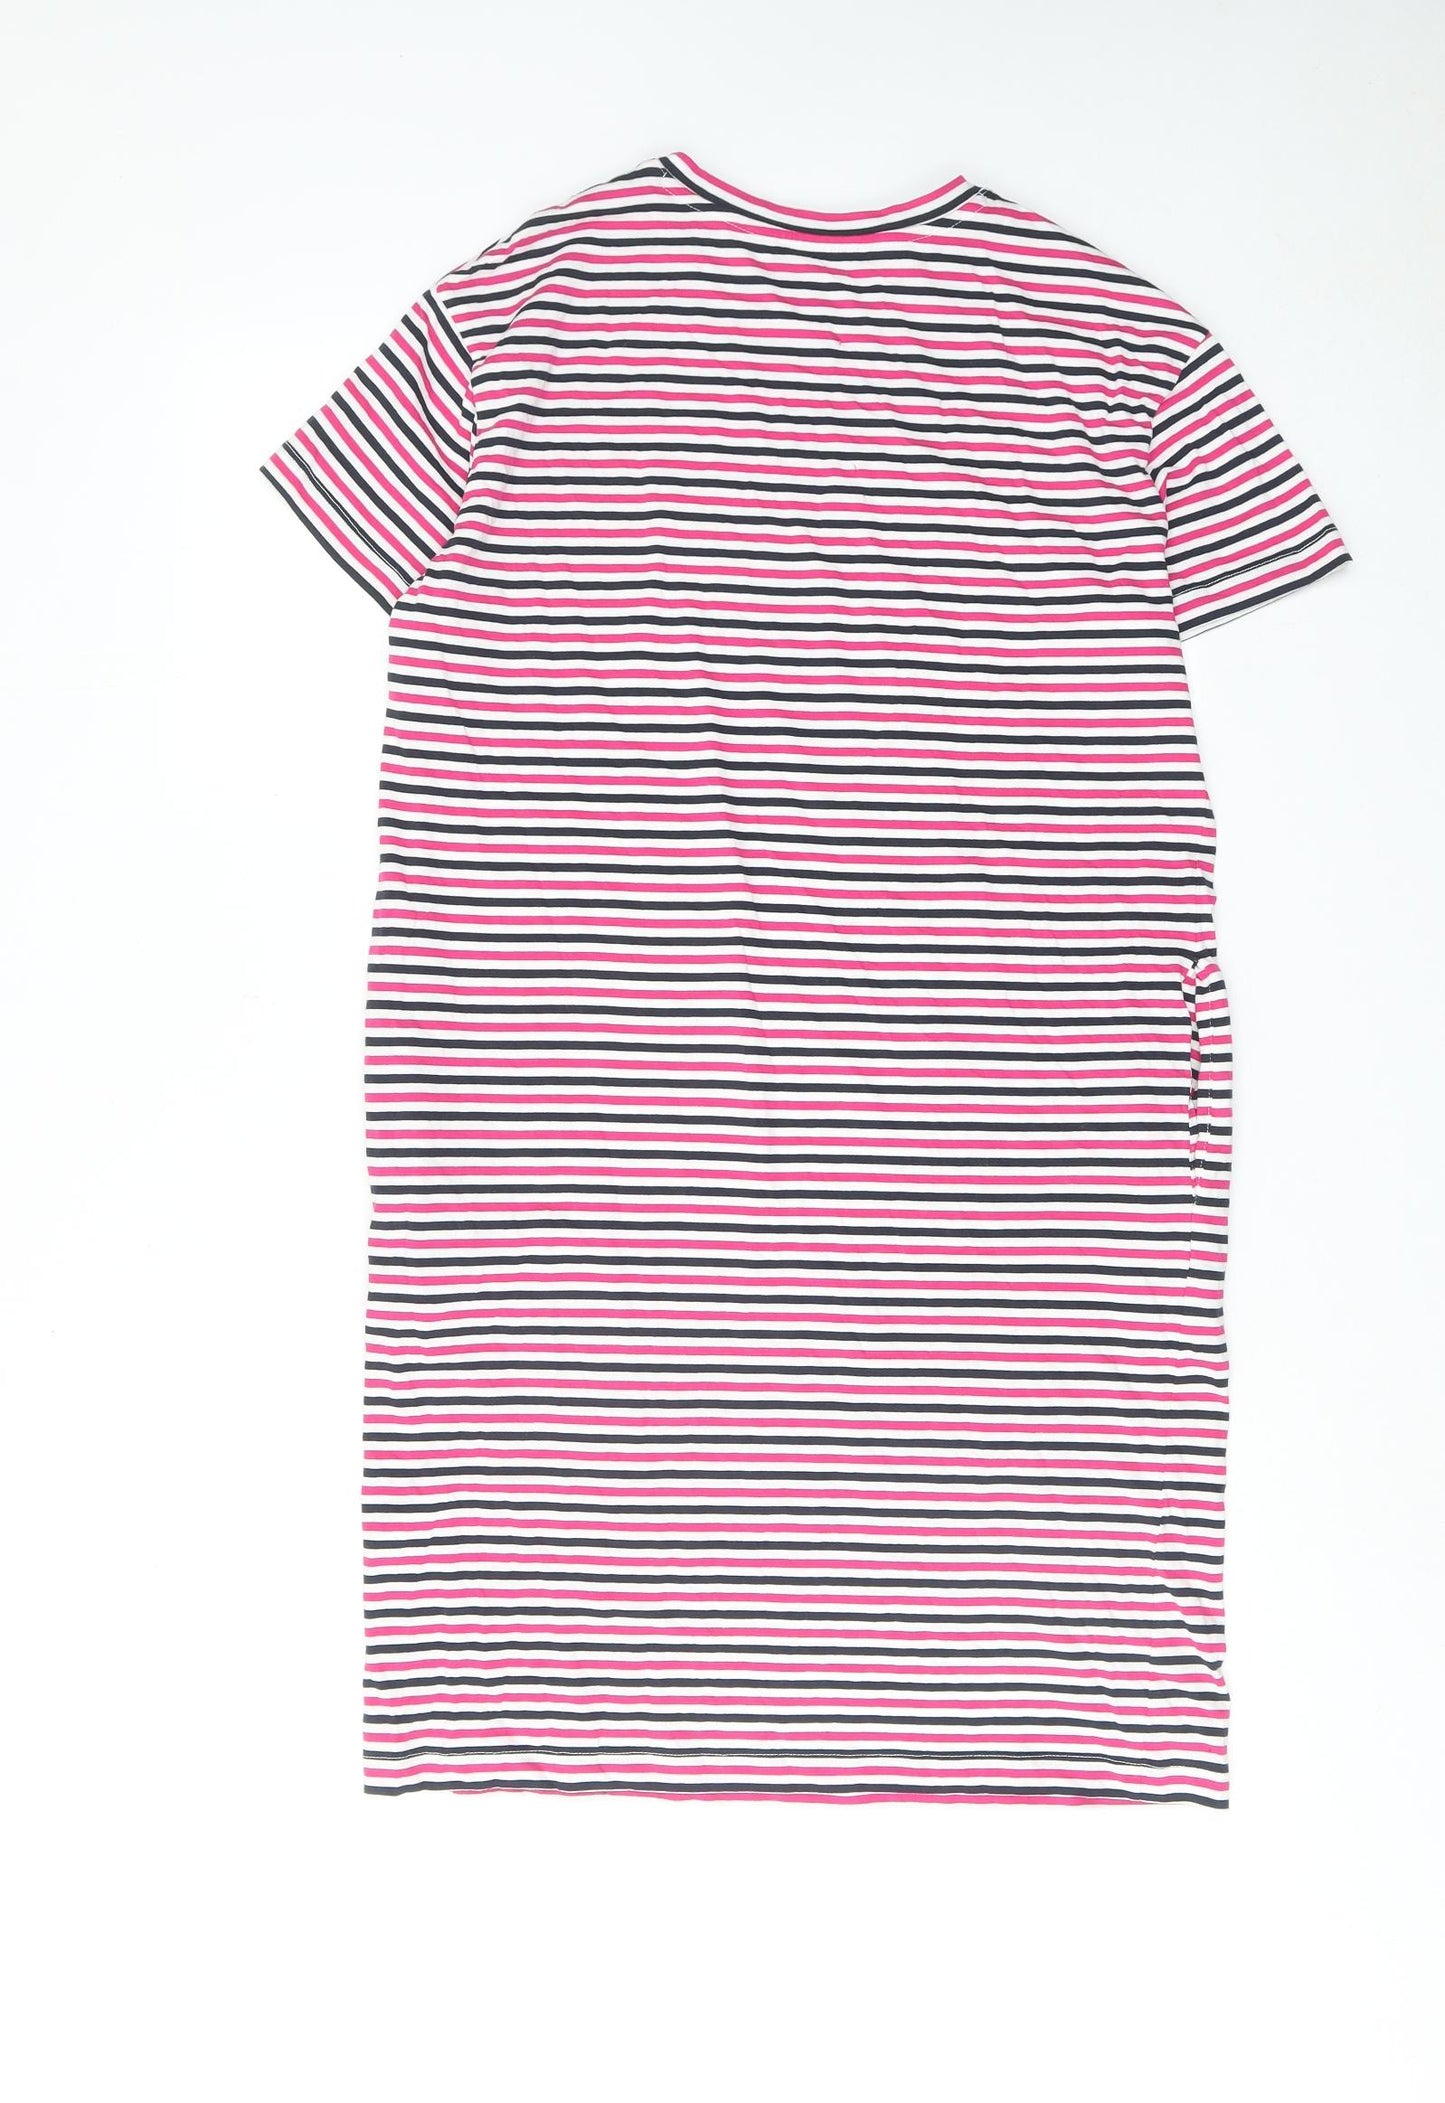 Marks and Spencer Womens Pink Striped Cotton T-Shirt Dress Size 8 Round Neck Pullover